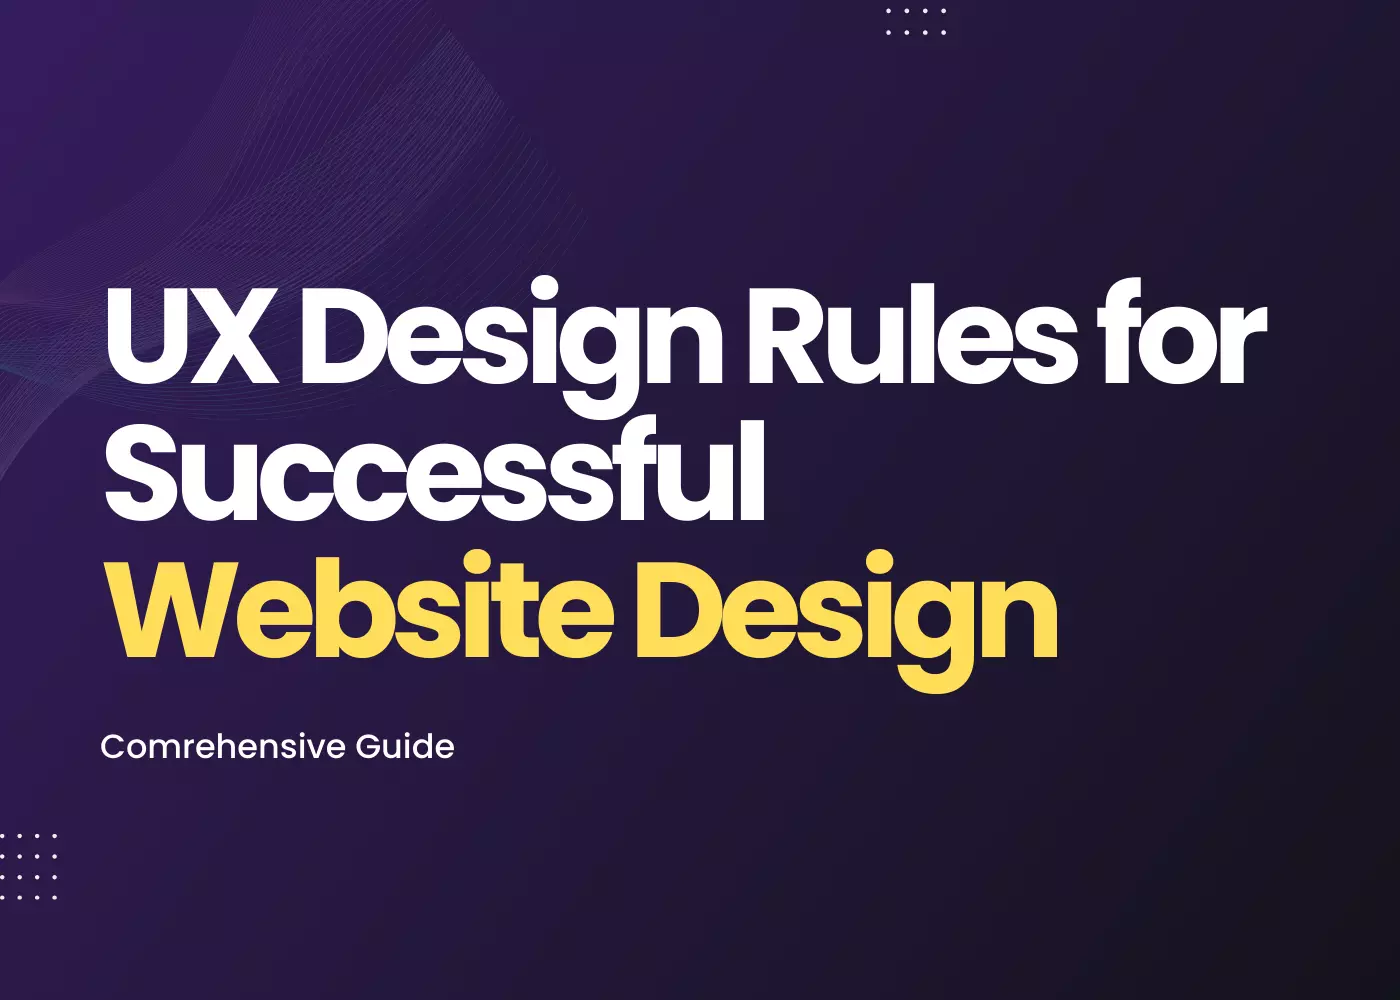 Crafting User-Centered Experiences: UX Design Rules for Successful Website Design